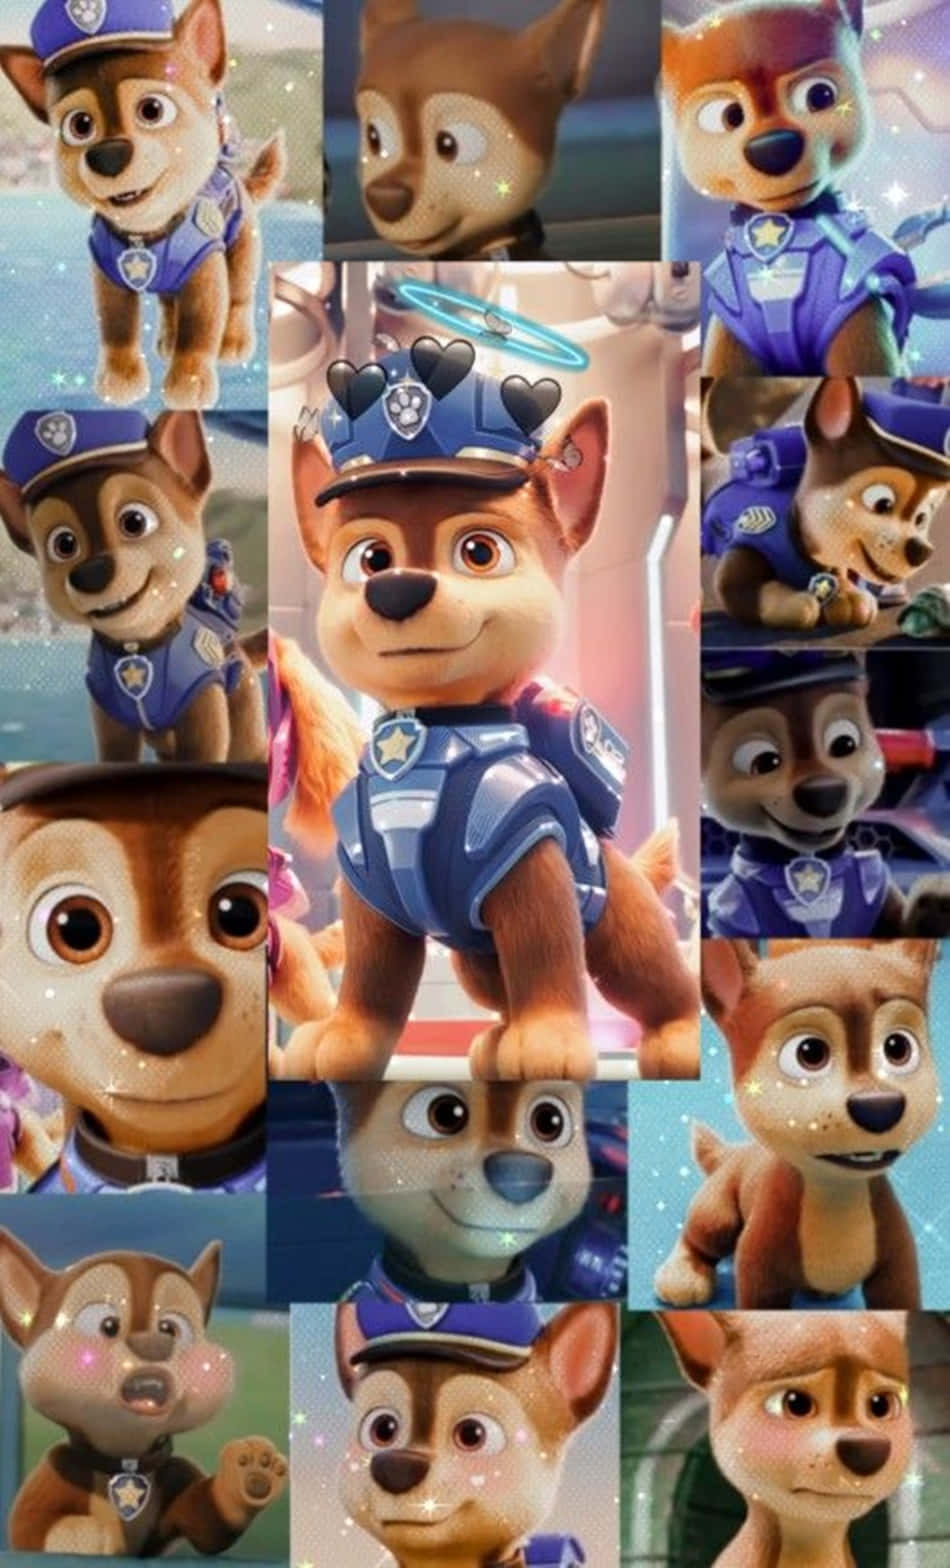 Chase from Paw Patrol is always ready to help! Wallpaper